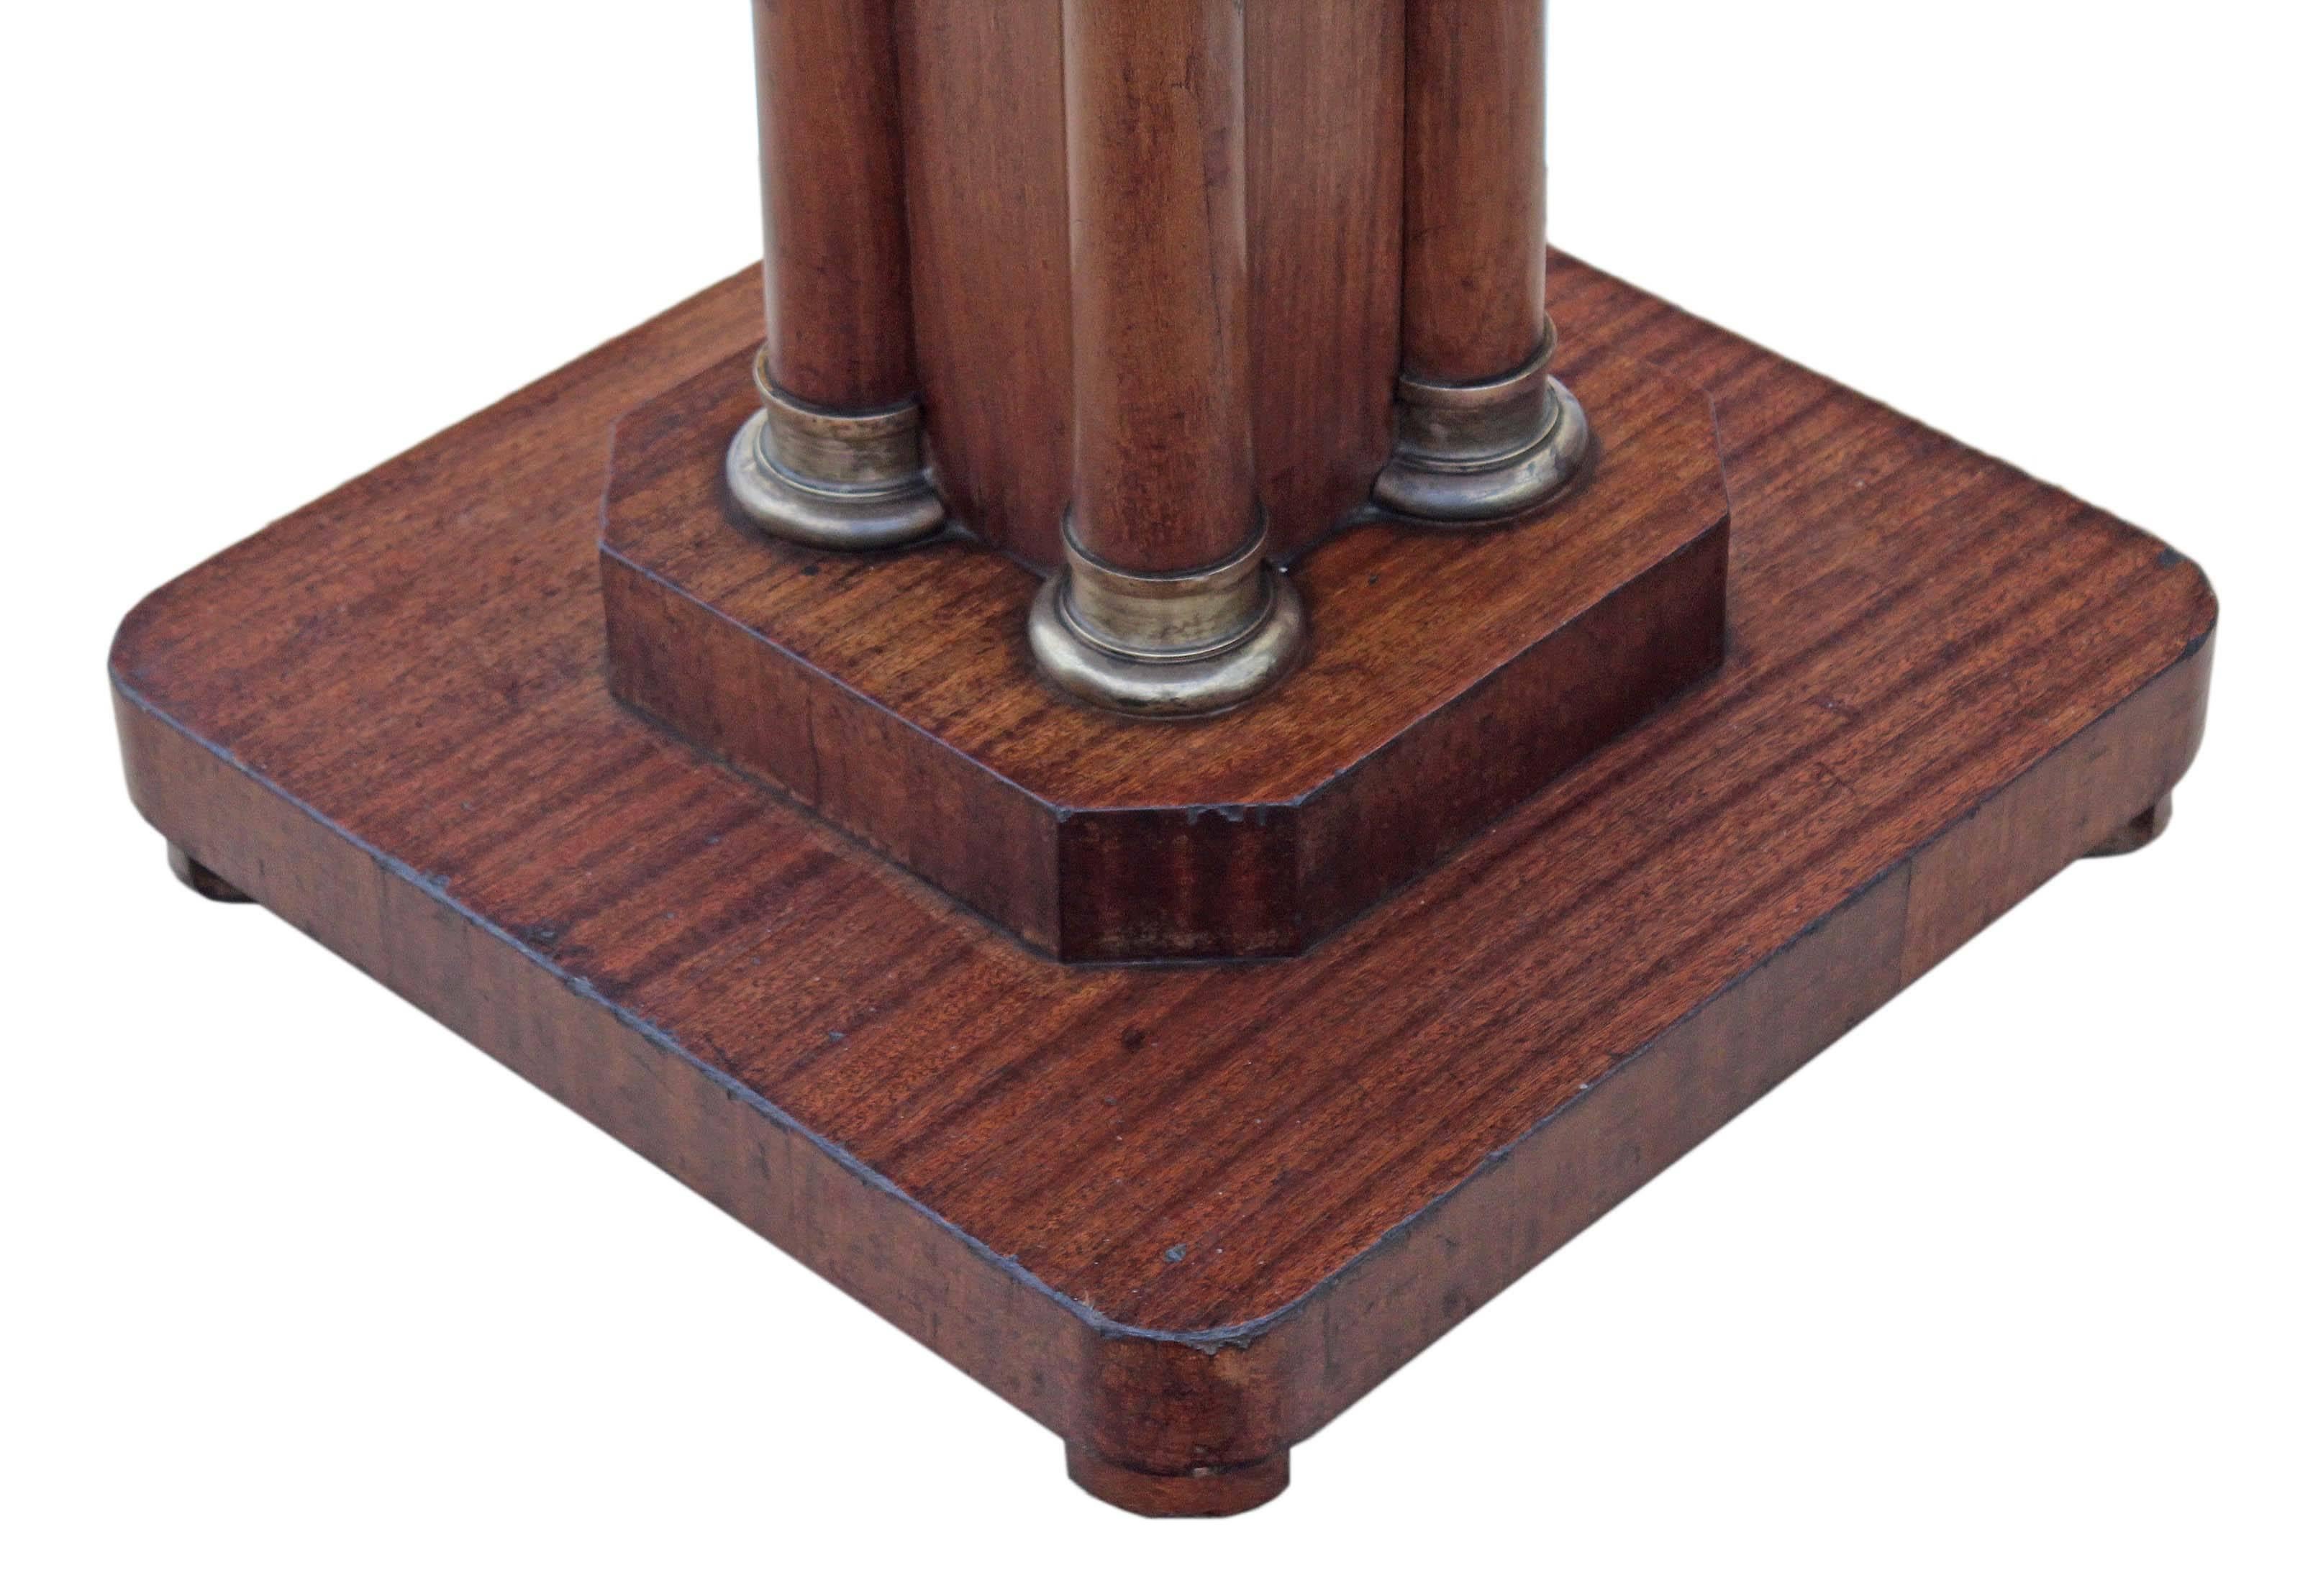 Quality Art Deco circa 1920 mahogany centre, window, side, lamp or supper table

This is a quality table, that is full of age, charm and character.

Rare and attractive.

Magnificent pedestal base with four ormolu brass mounts at the bottom of